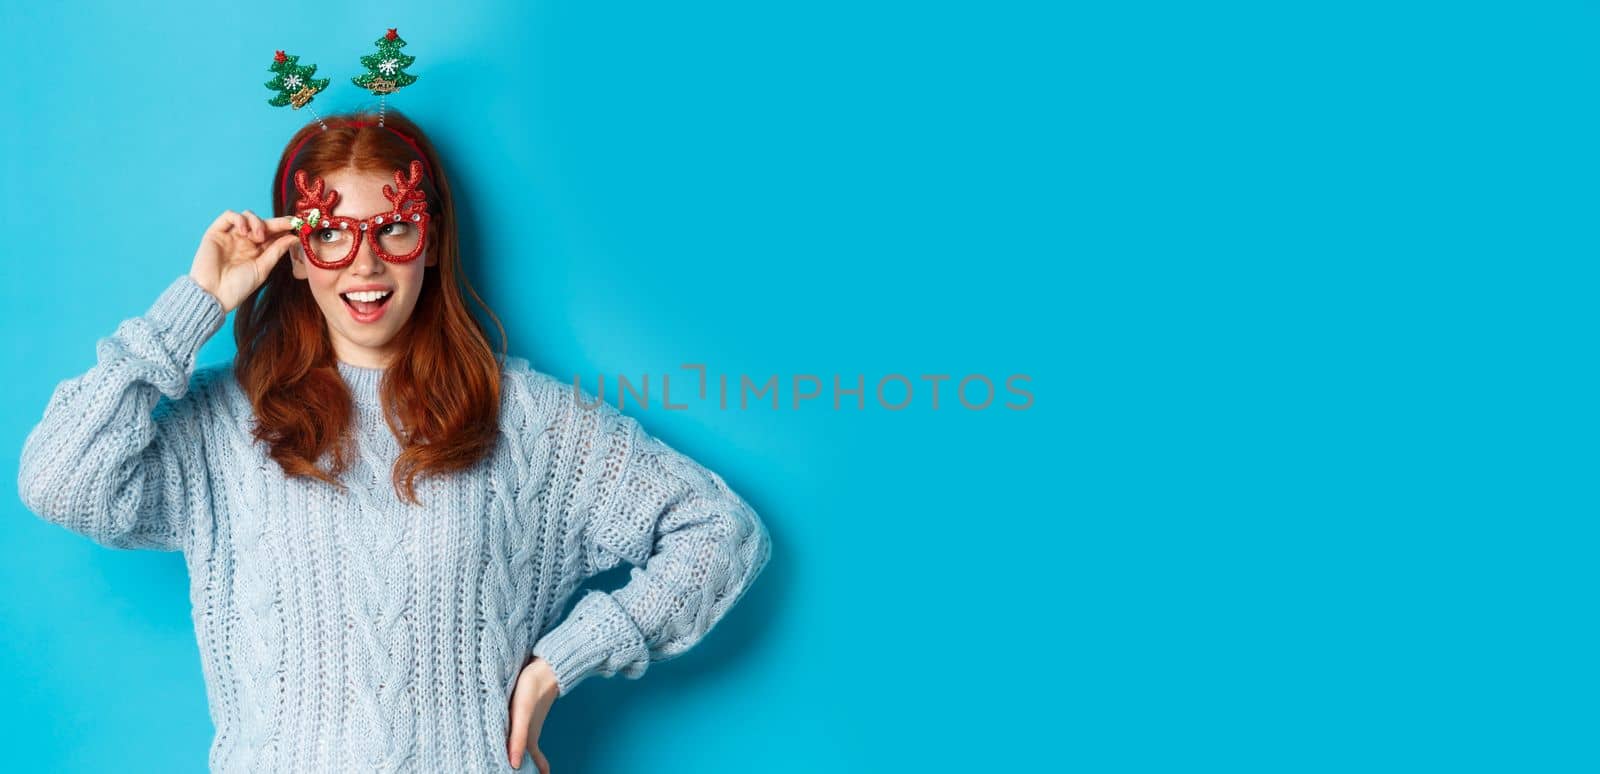 Christmas party and celebration concept. Cute redhead teen girl celebrating New Year, wearing xmas tree headband and funny glasses, looking left amused, blue background.